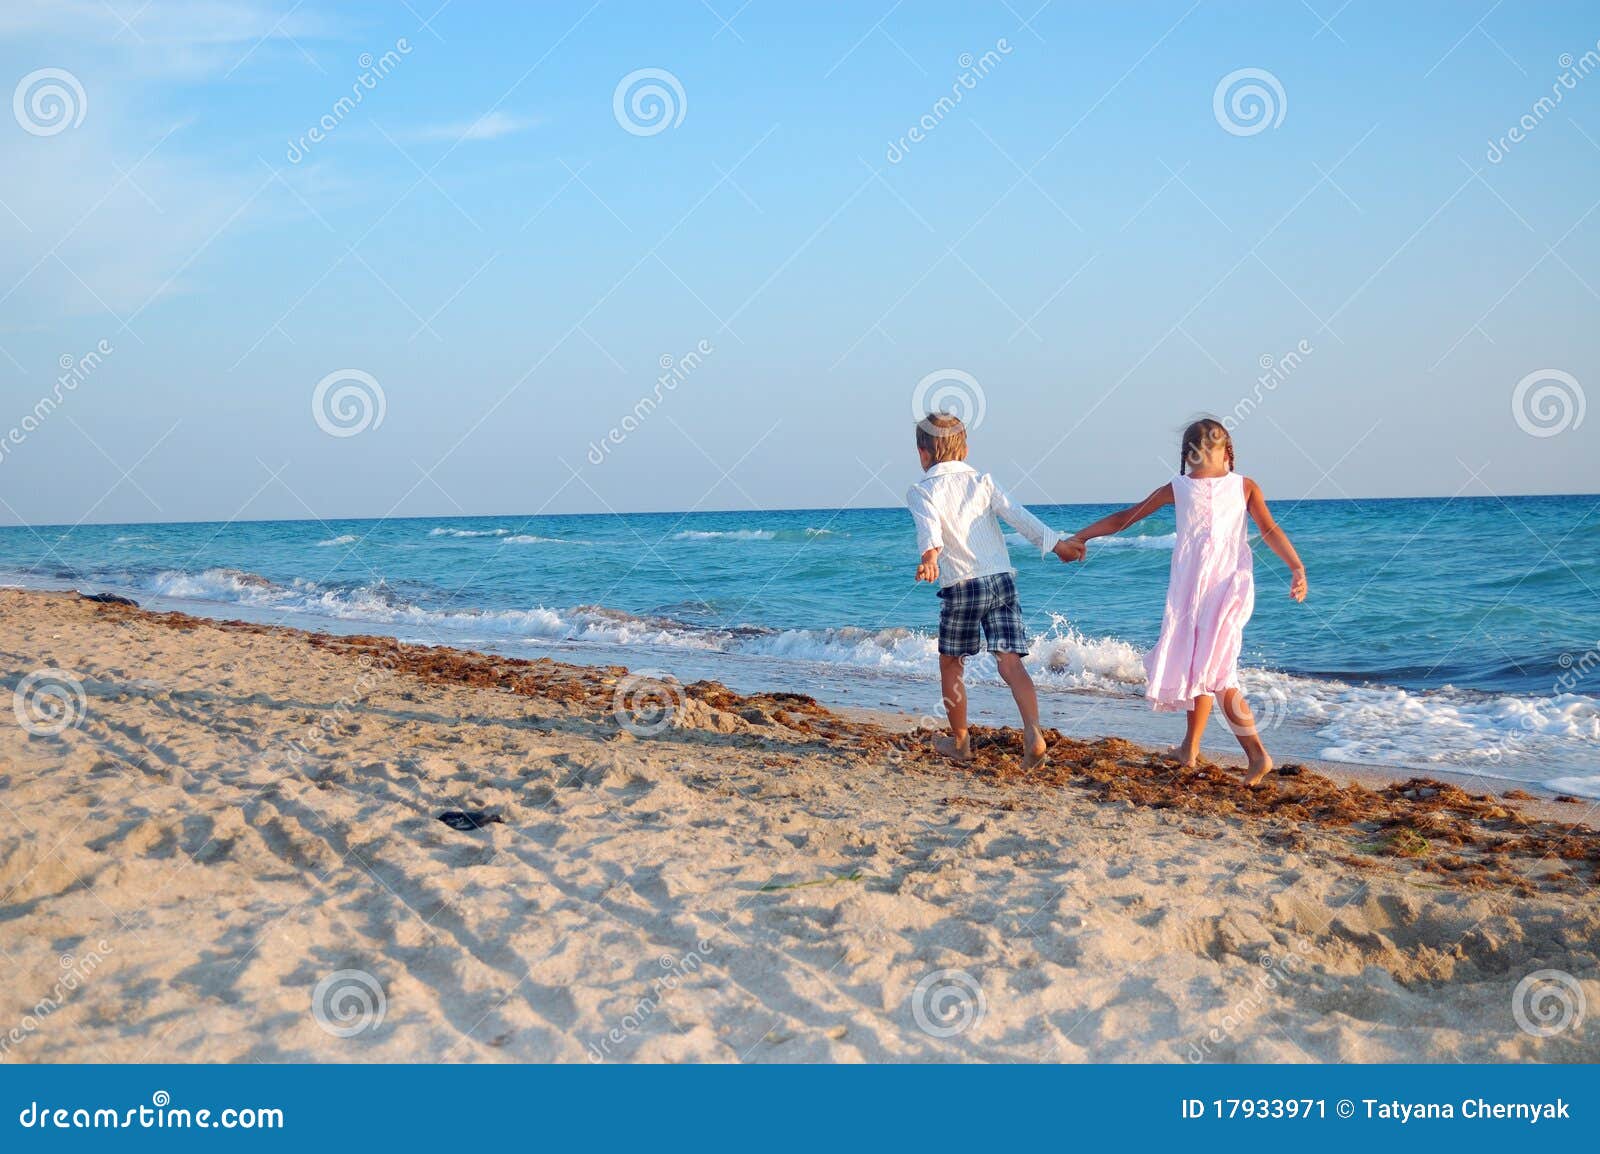 kids walking along the beach together